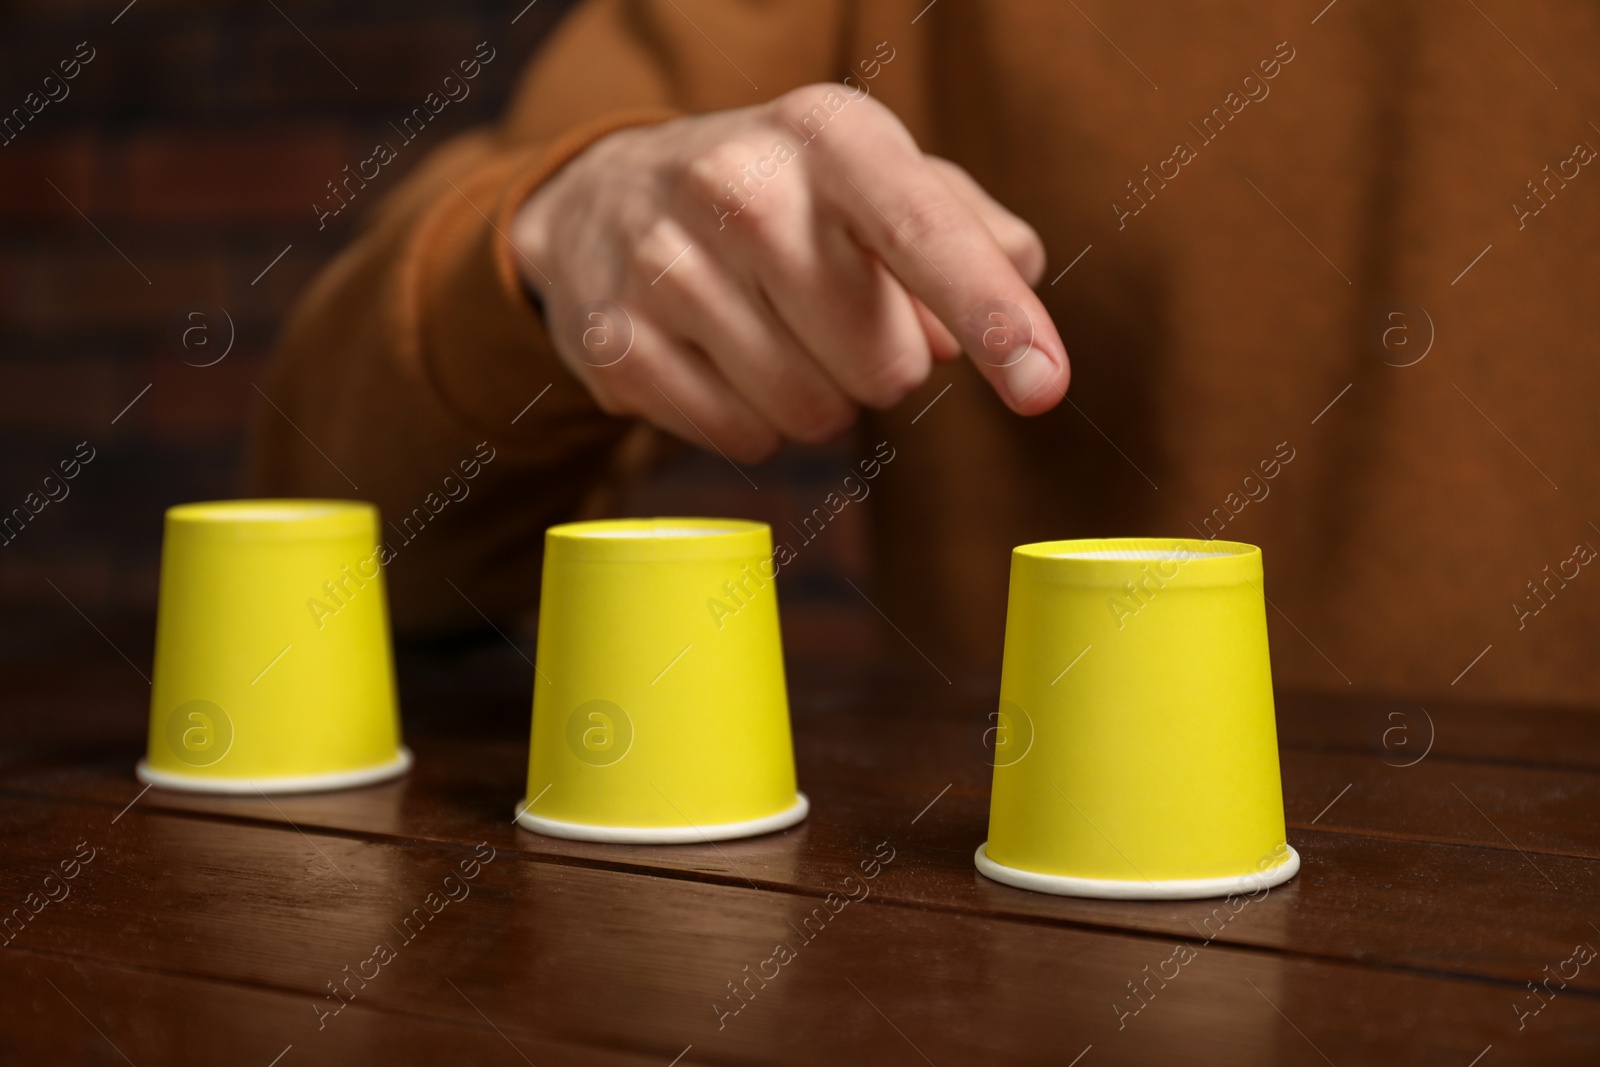 Photo of Man playing shell game at wooden table, closeup